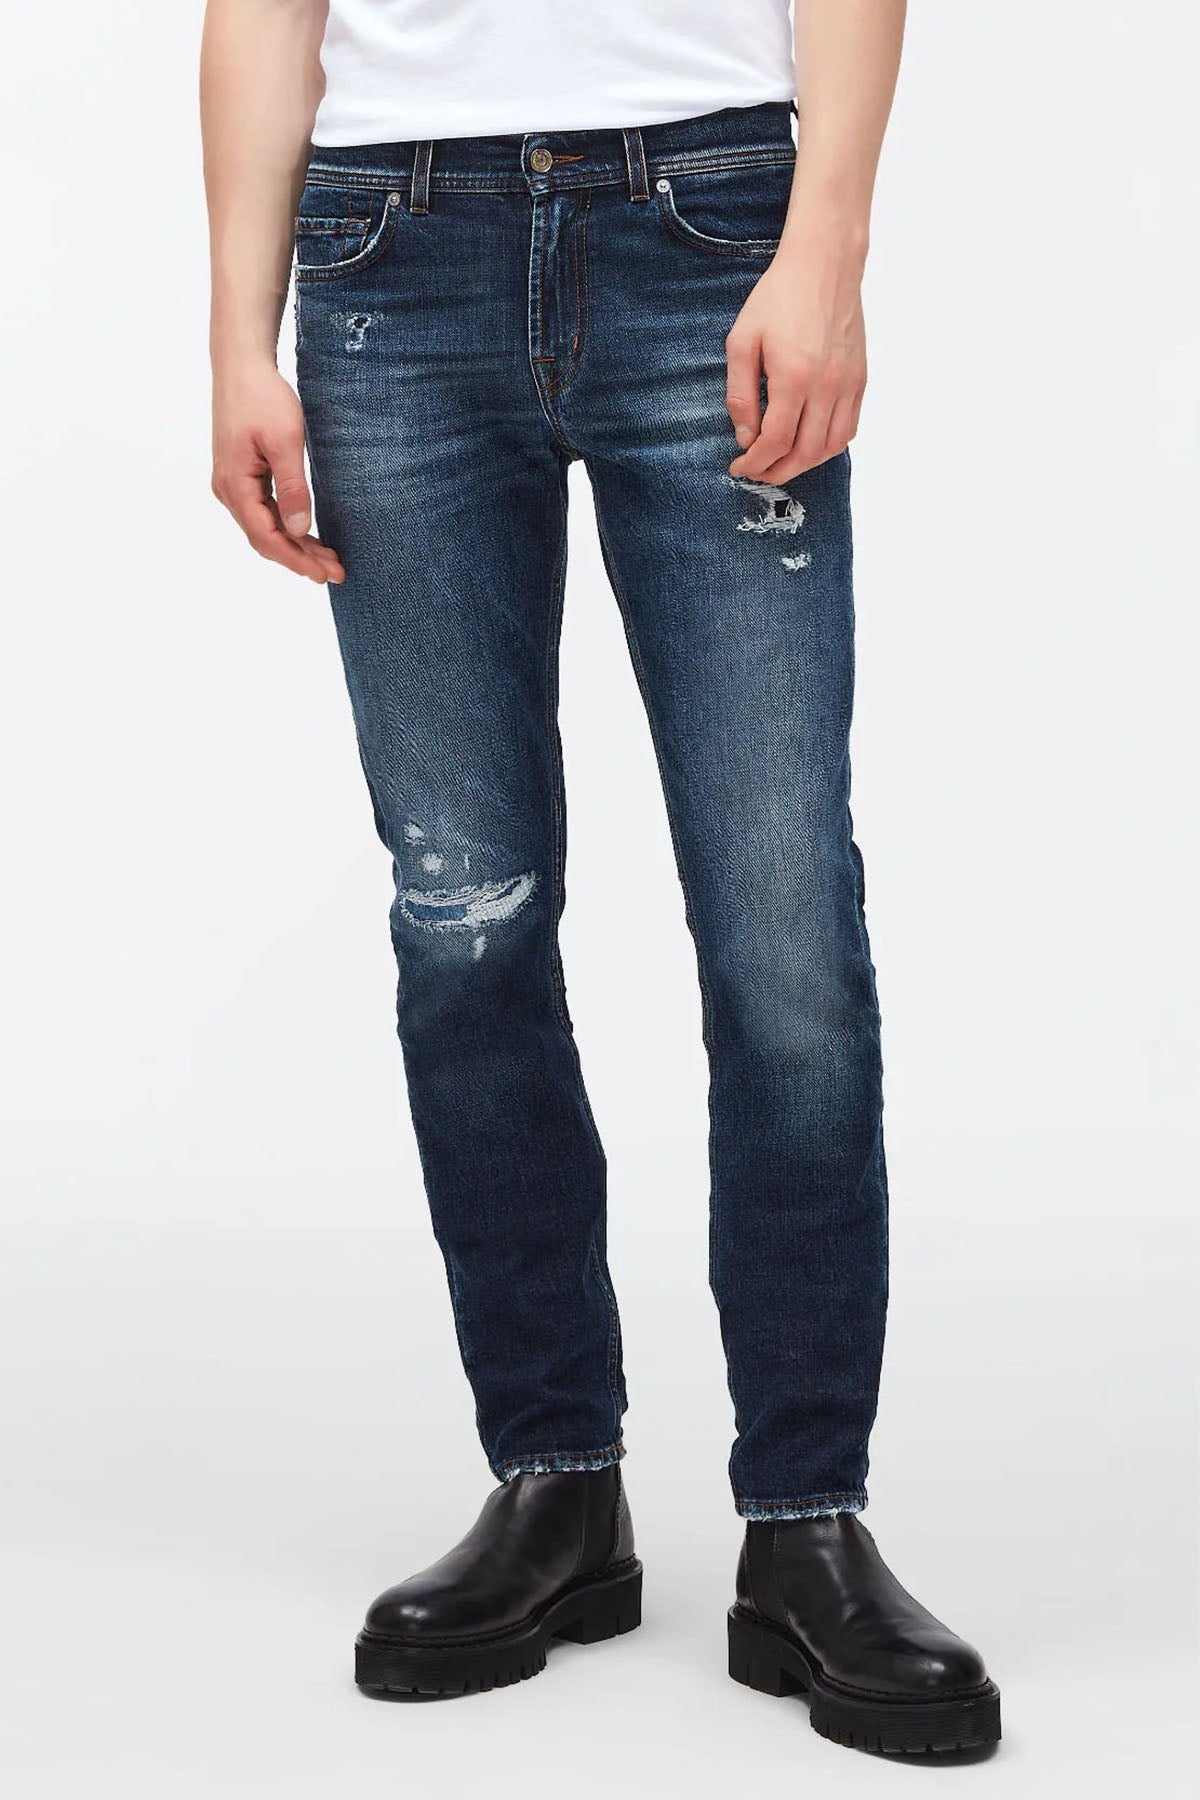 7 For All Mankind Ronnie Skinny Fit Streç Jeans-Libas Trendy Fashion Store